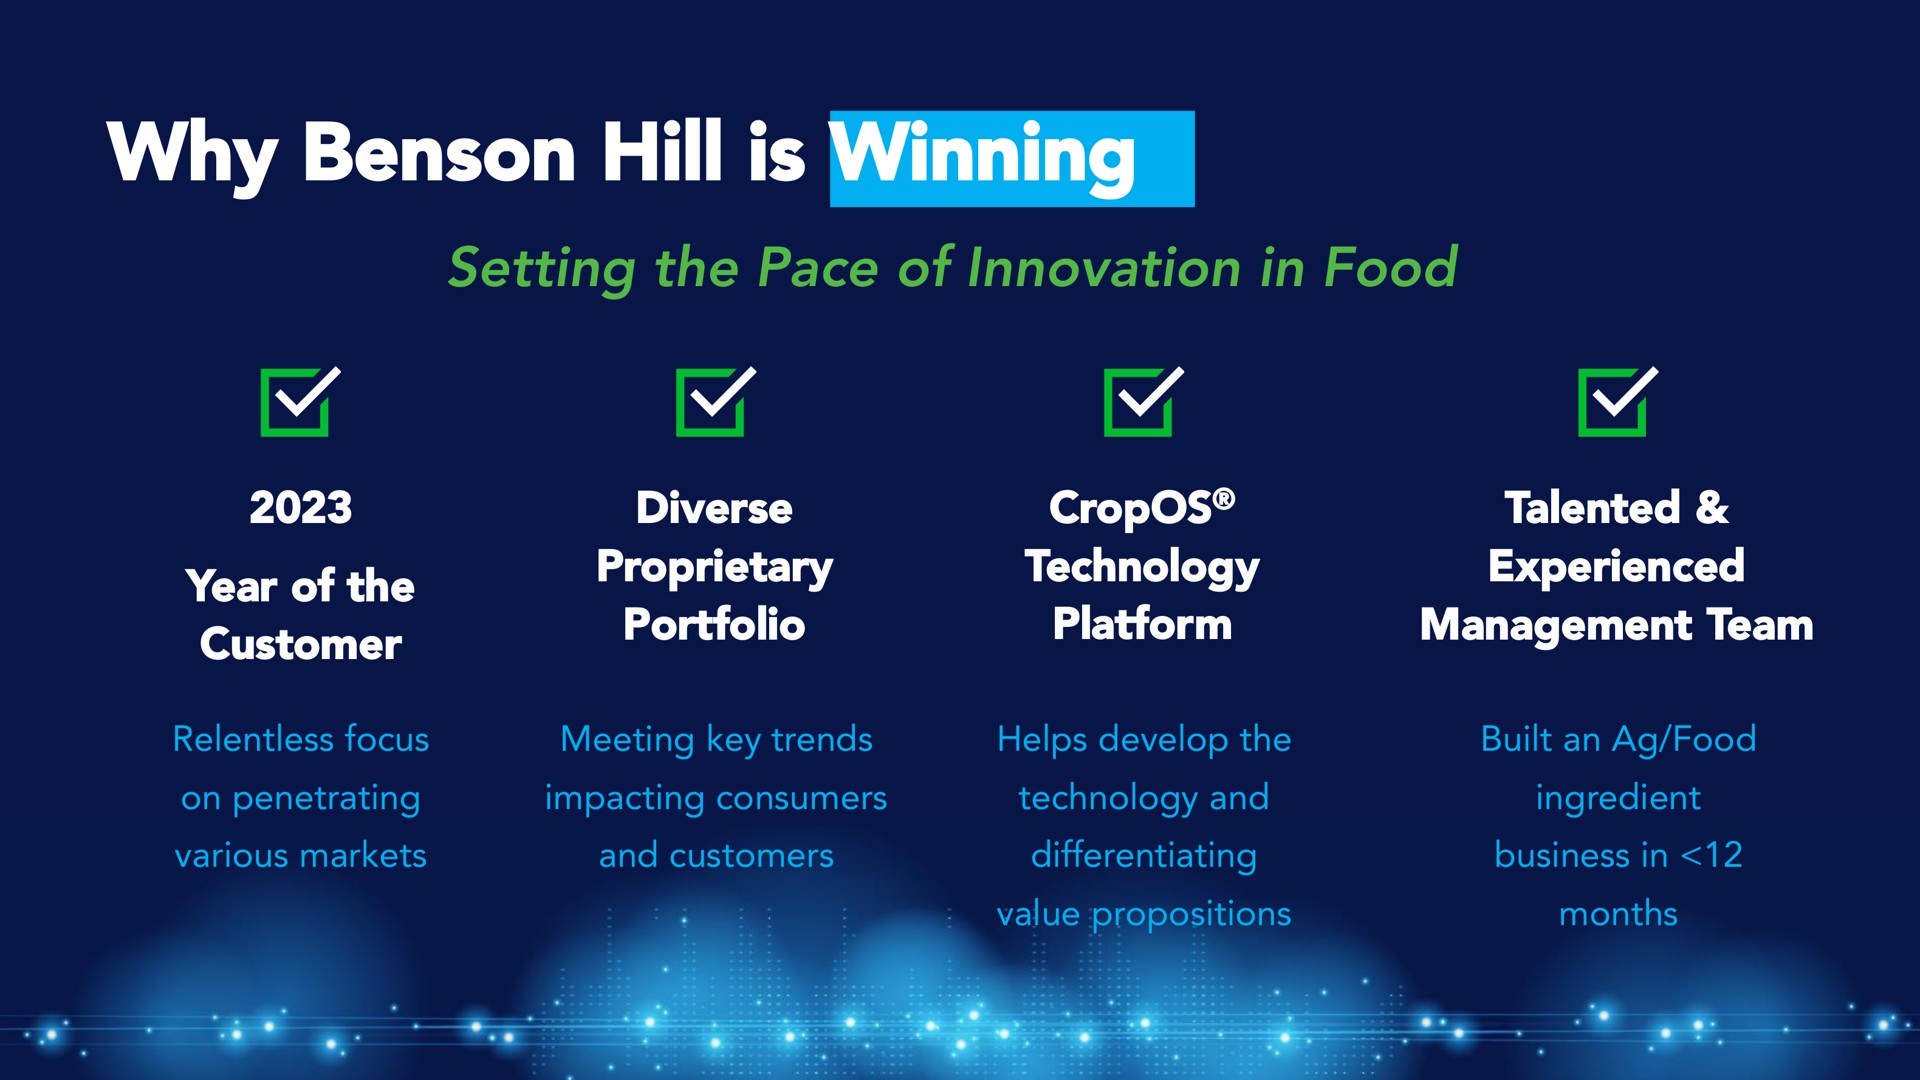 why hill is winning setting the pace of innovation in food year of the customer diverse proprietary portfolio technology platform talented experienced management team relentless focus meeting key trends helps develop the built an food on penetrating impacting consumers technology and ingredient various markets and customers differentiating business in value propositions months am | Benson Hill